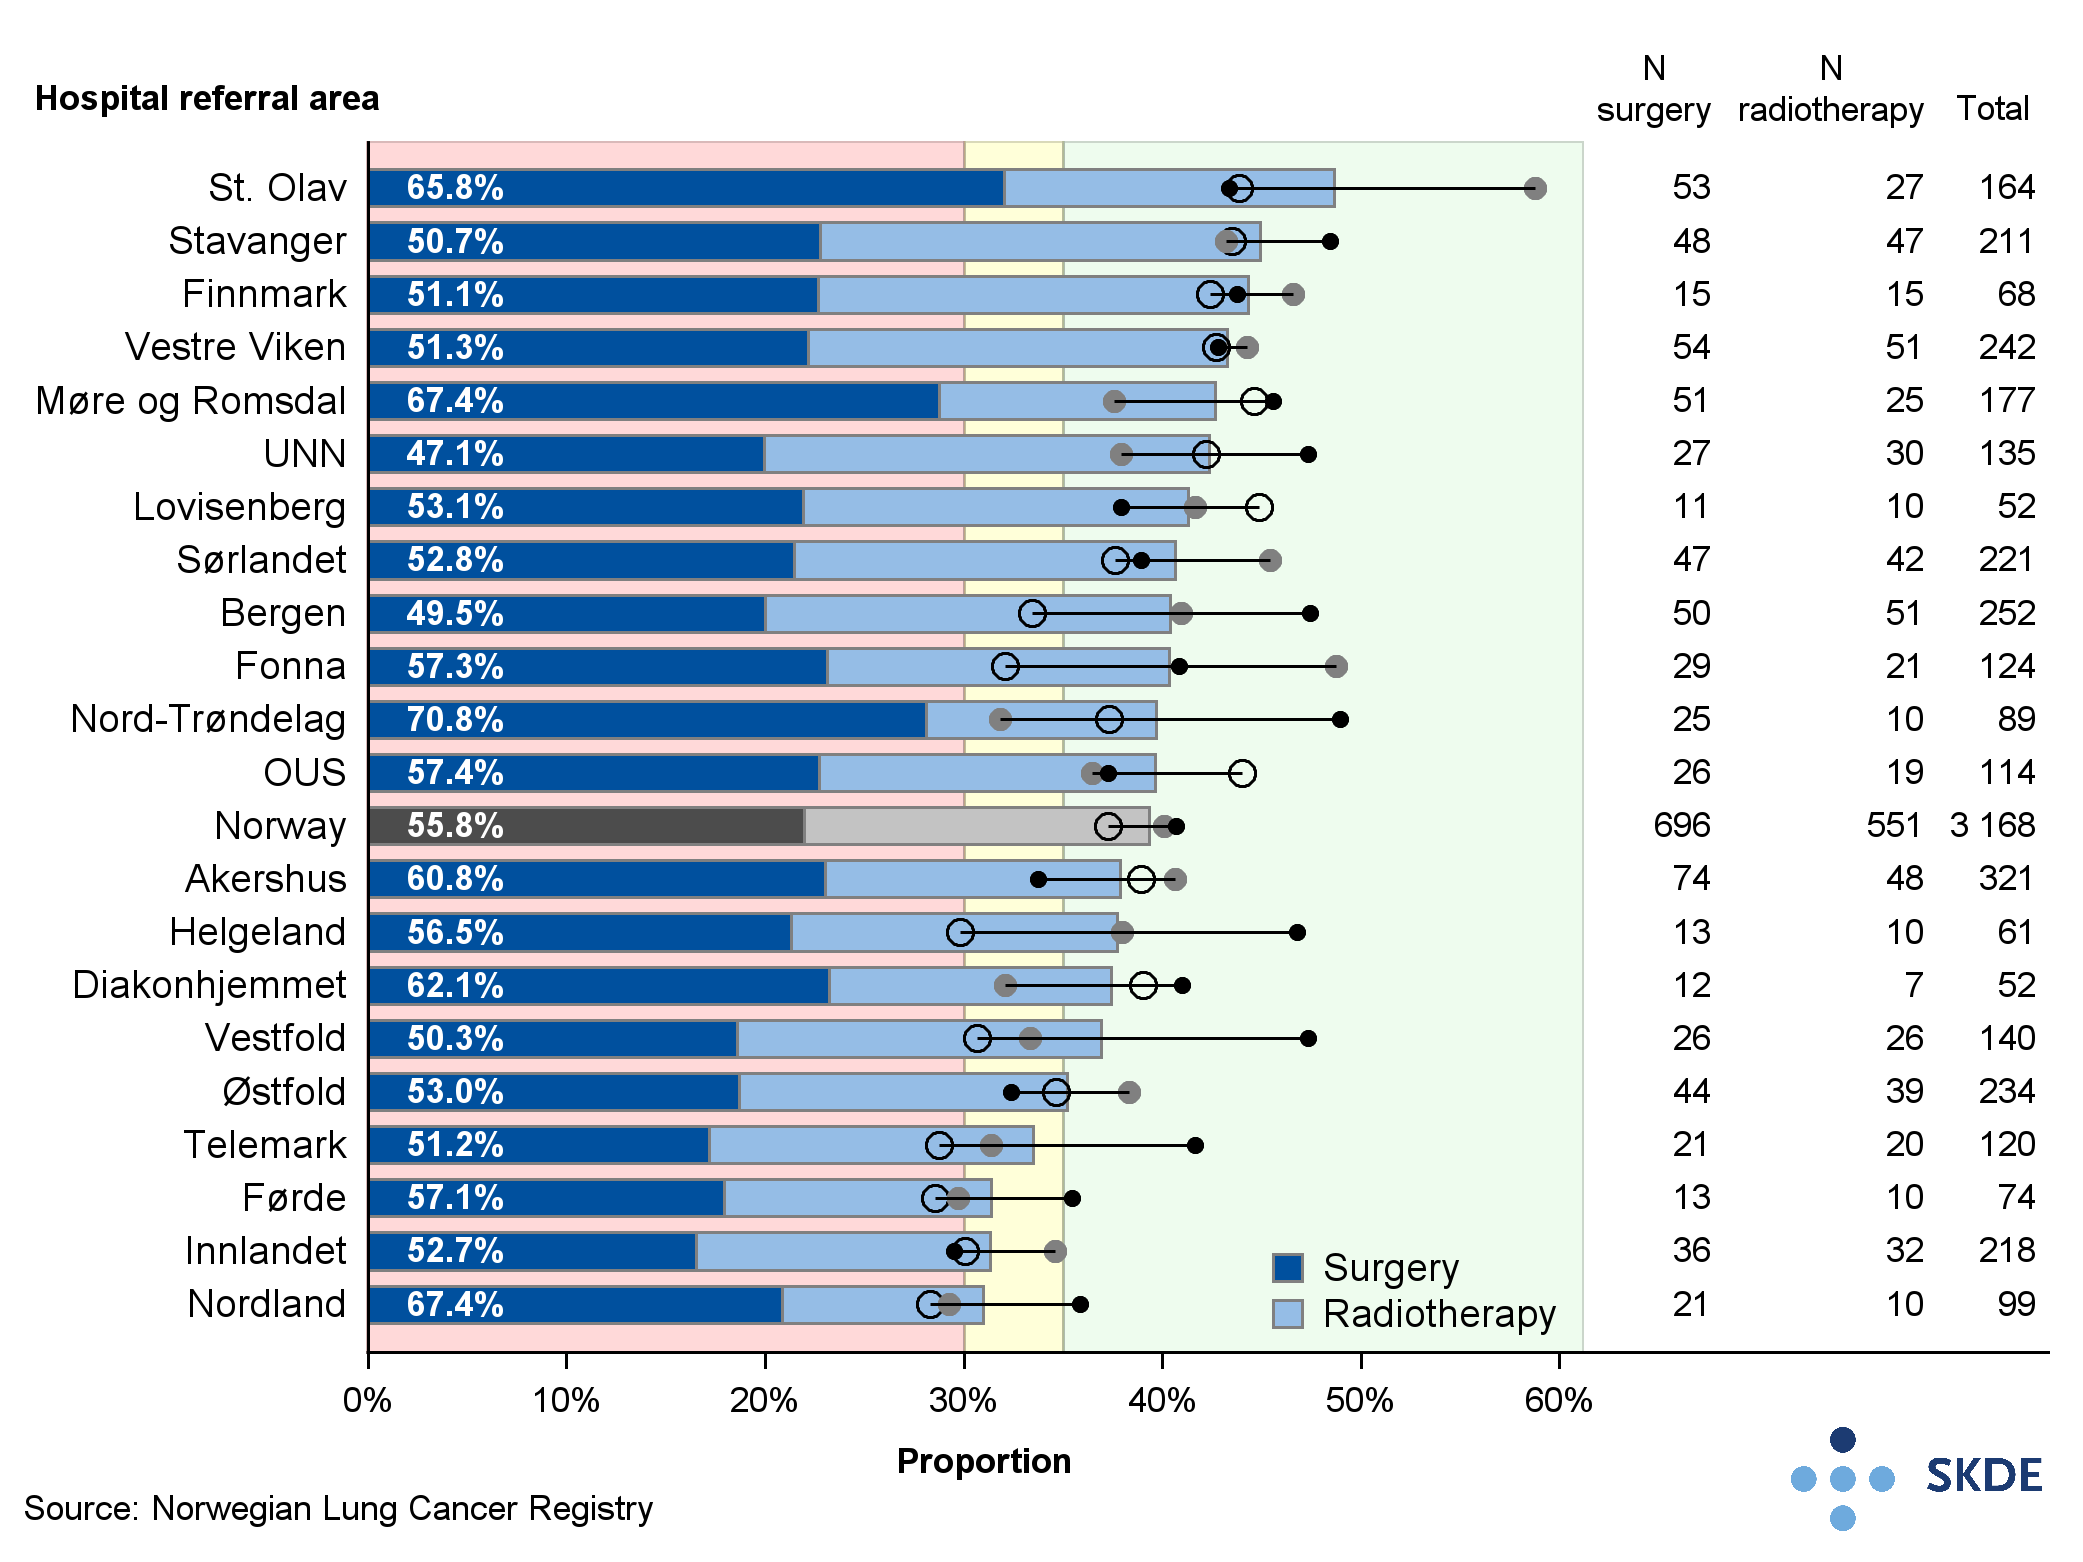 Proportion of patients with lung cancer who received curative therapy (surgery or radiotherapy)